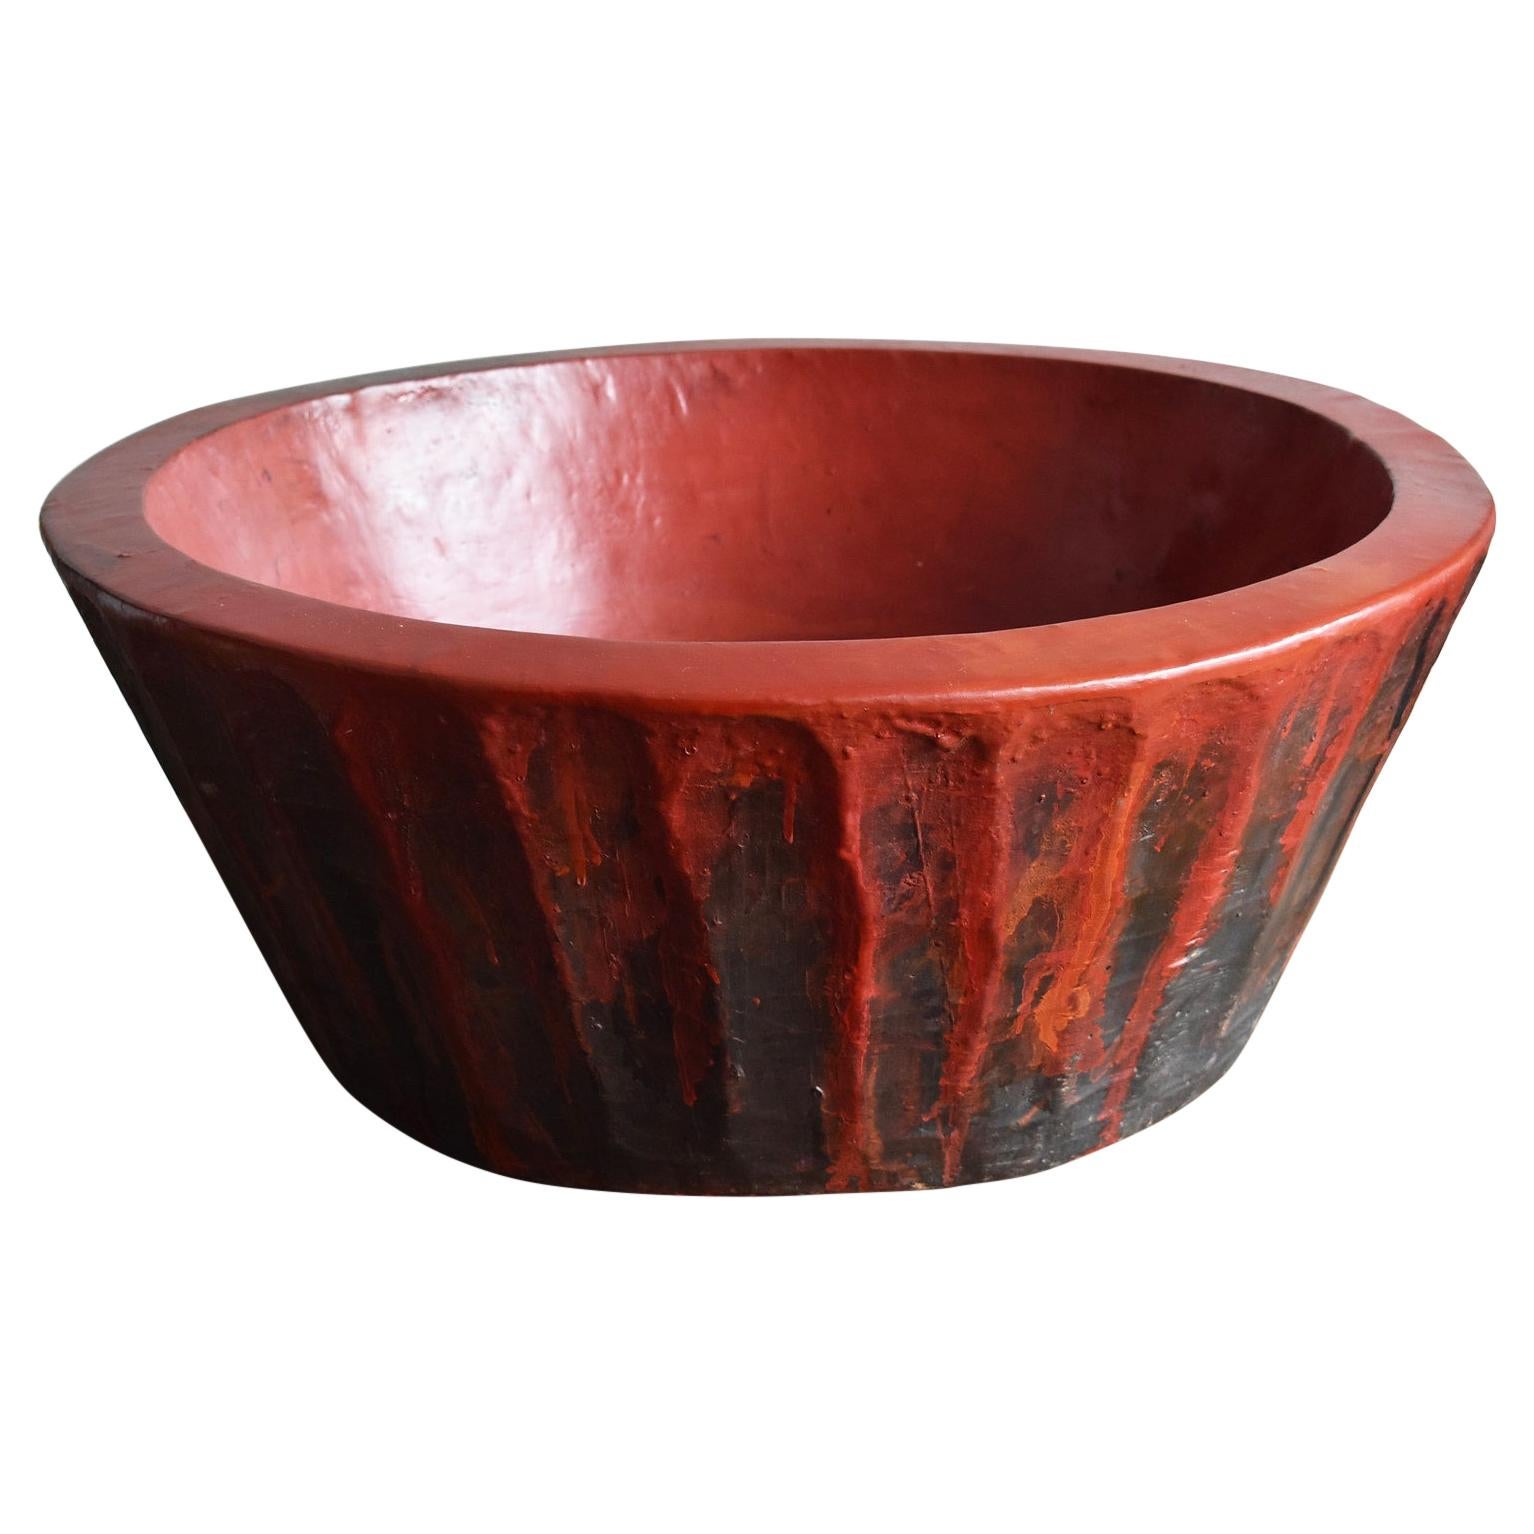 Lacquer Wooden Bowl Used by Japanese Lacquer Craftsmen / Antique Lacquerware Too